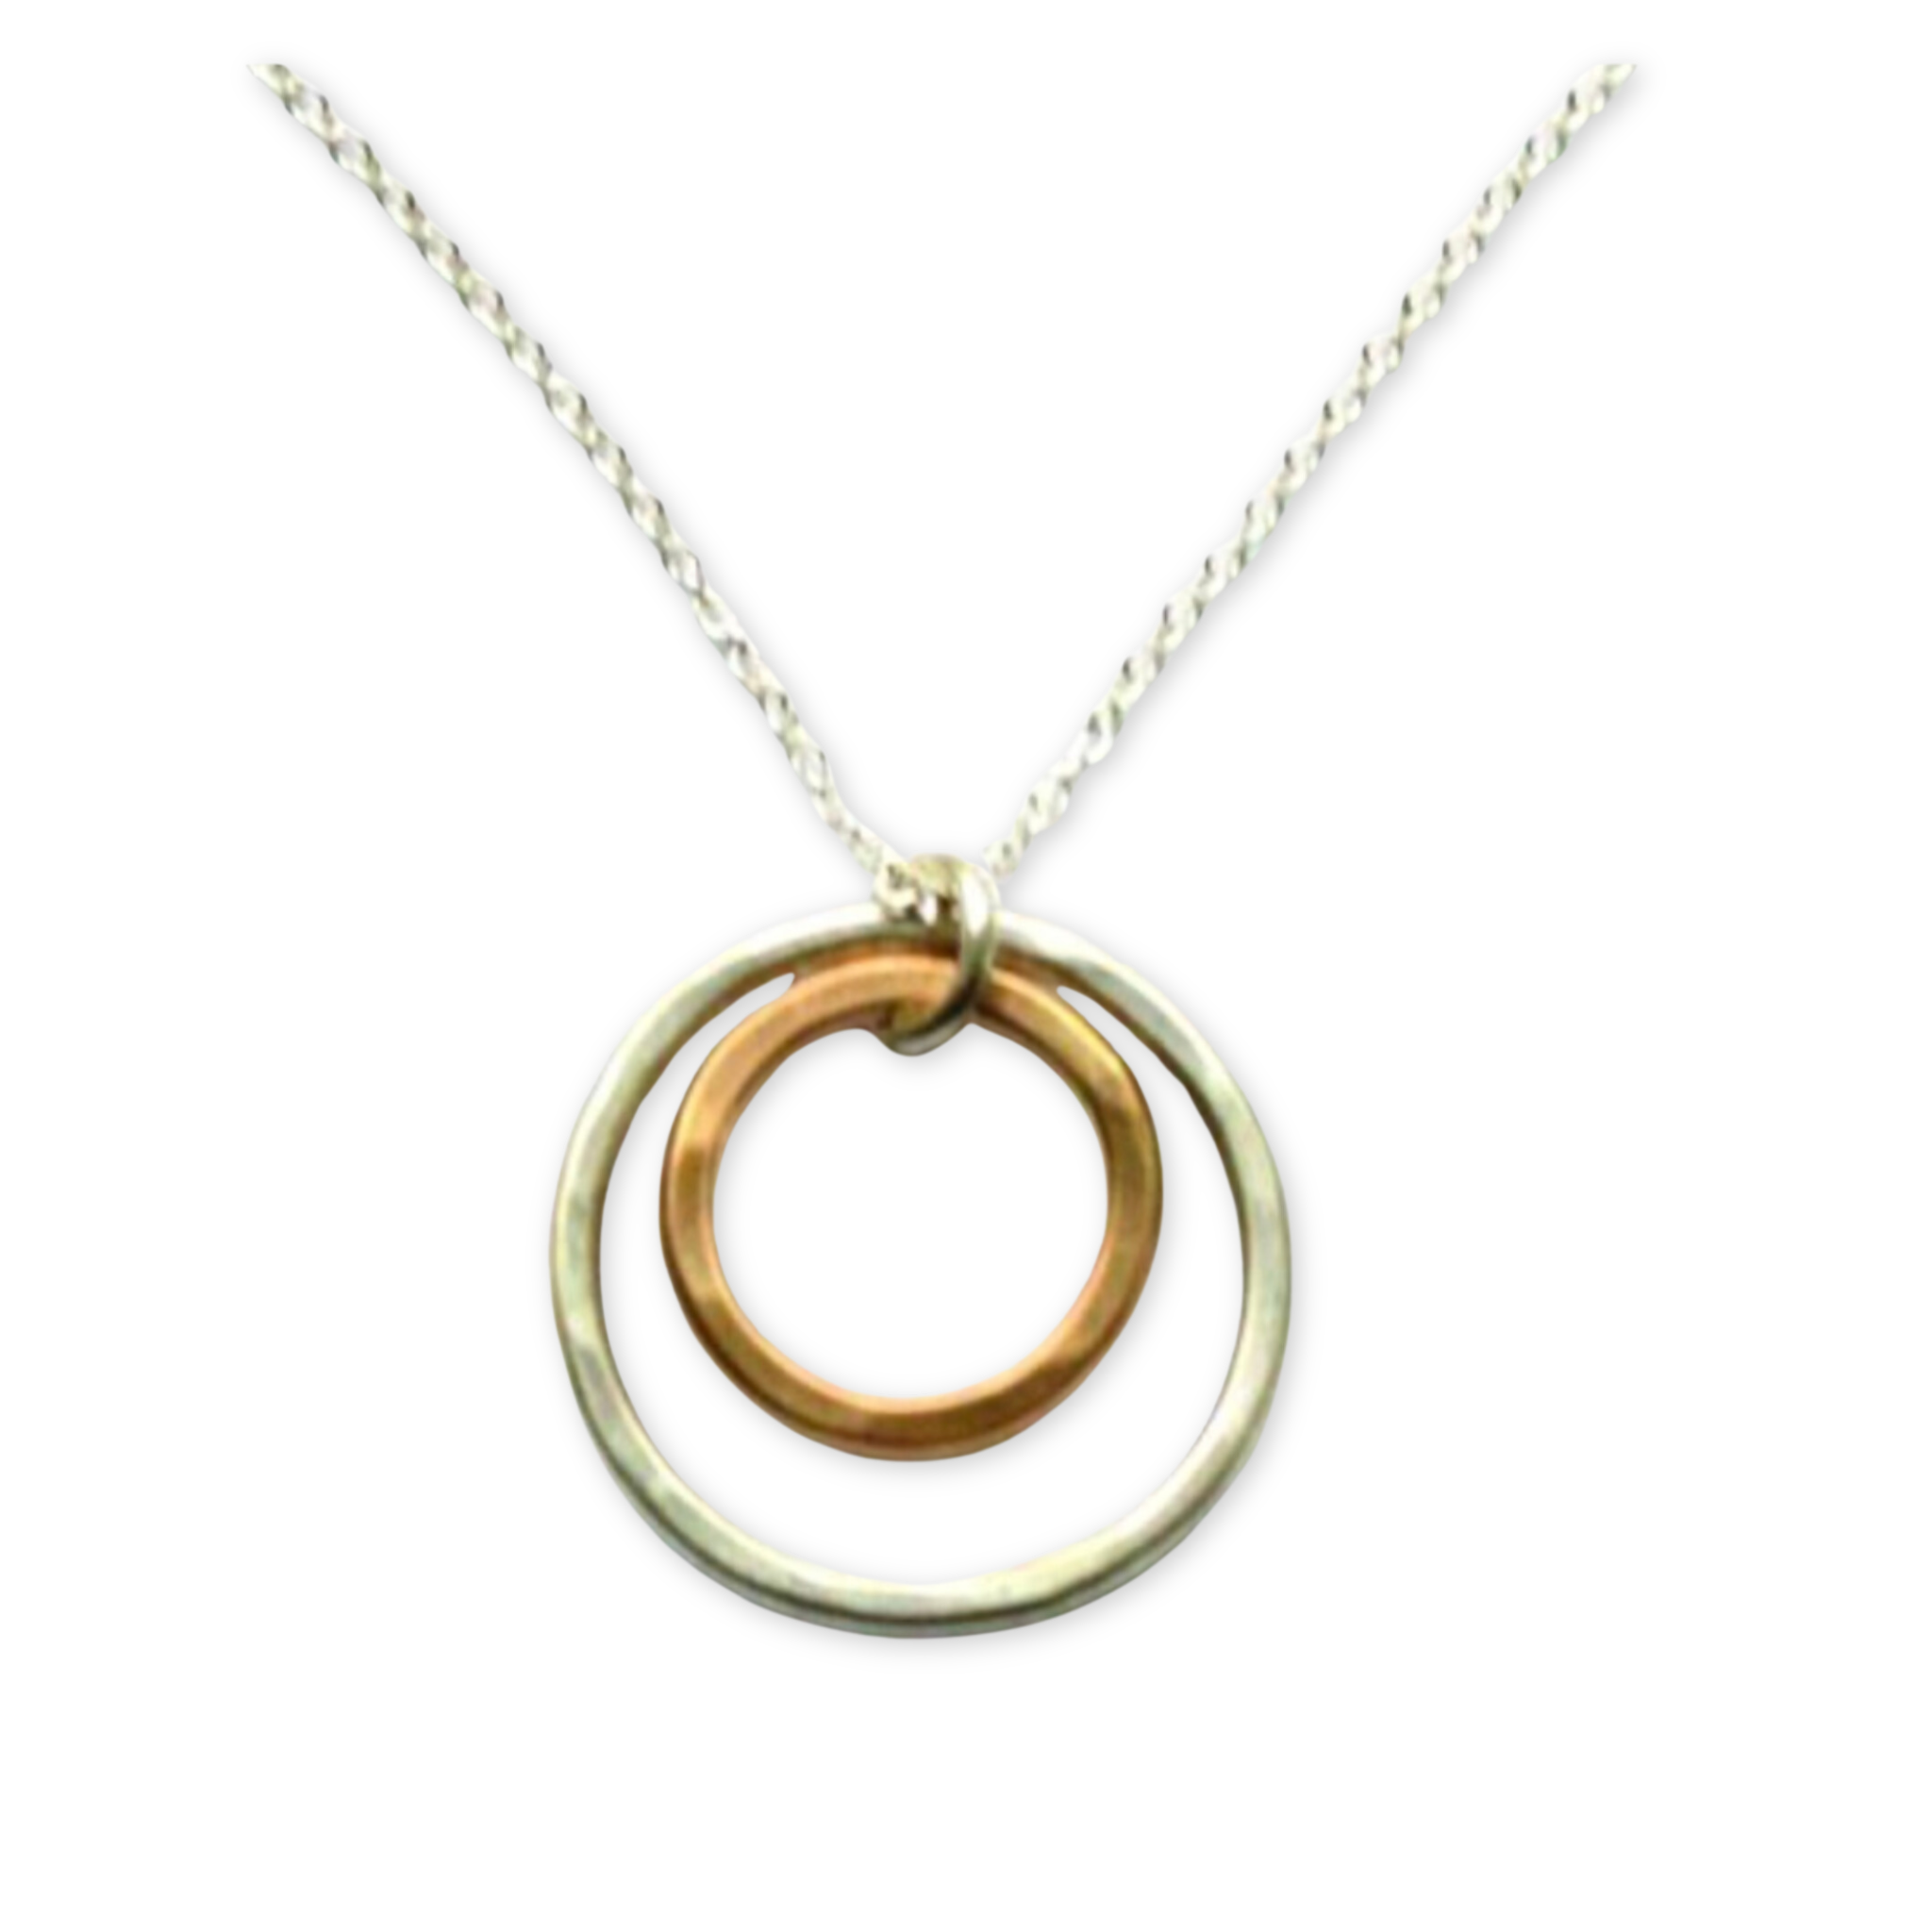 necklace with two hand forged hammered circles hanging from a thin chain